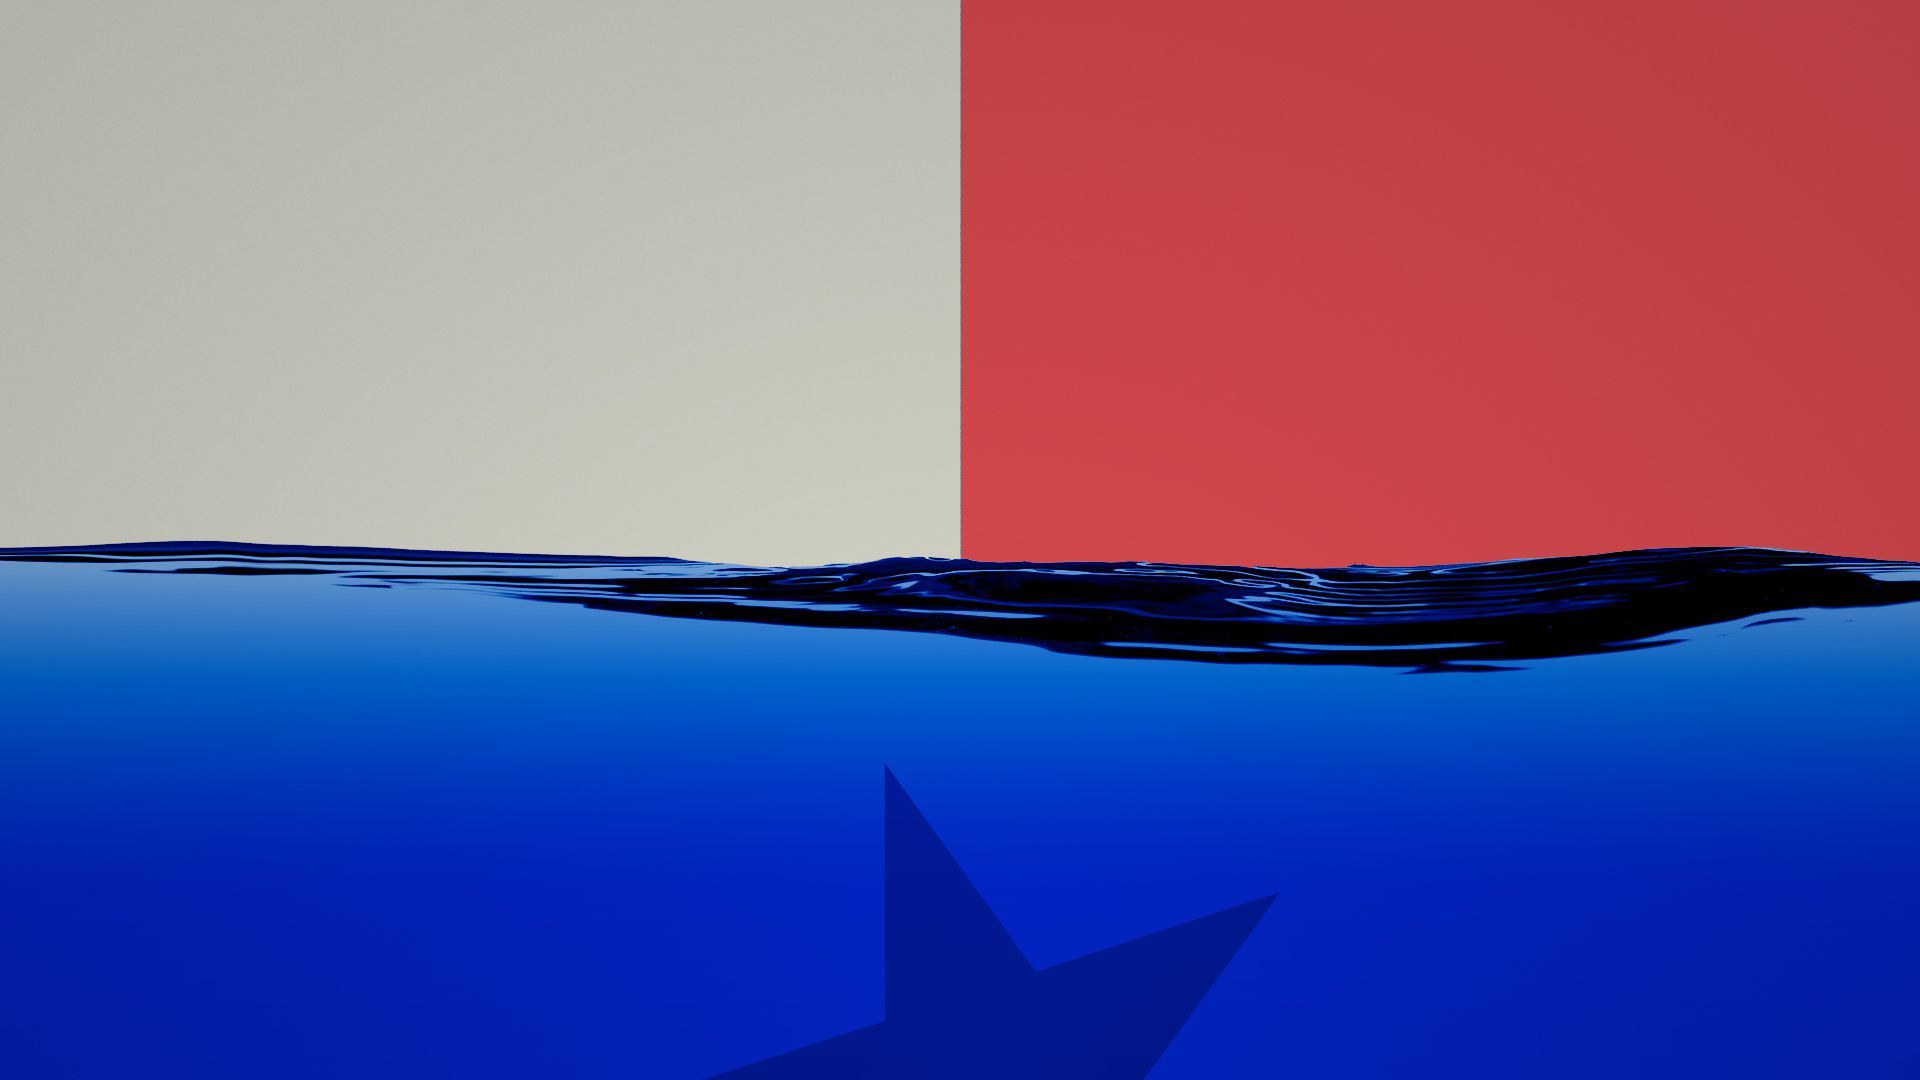 Illustration of the Texas flag rotated 90 degrees, with water replacing the blue part.